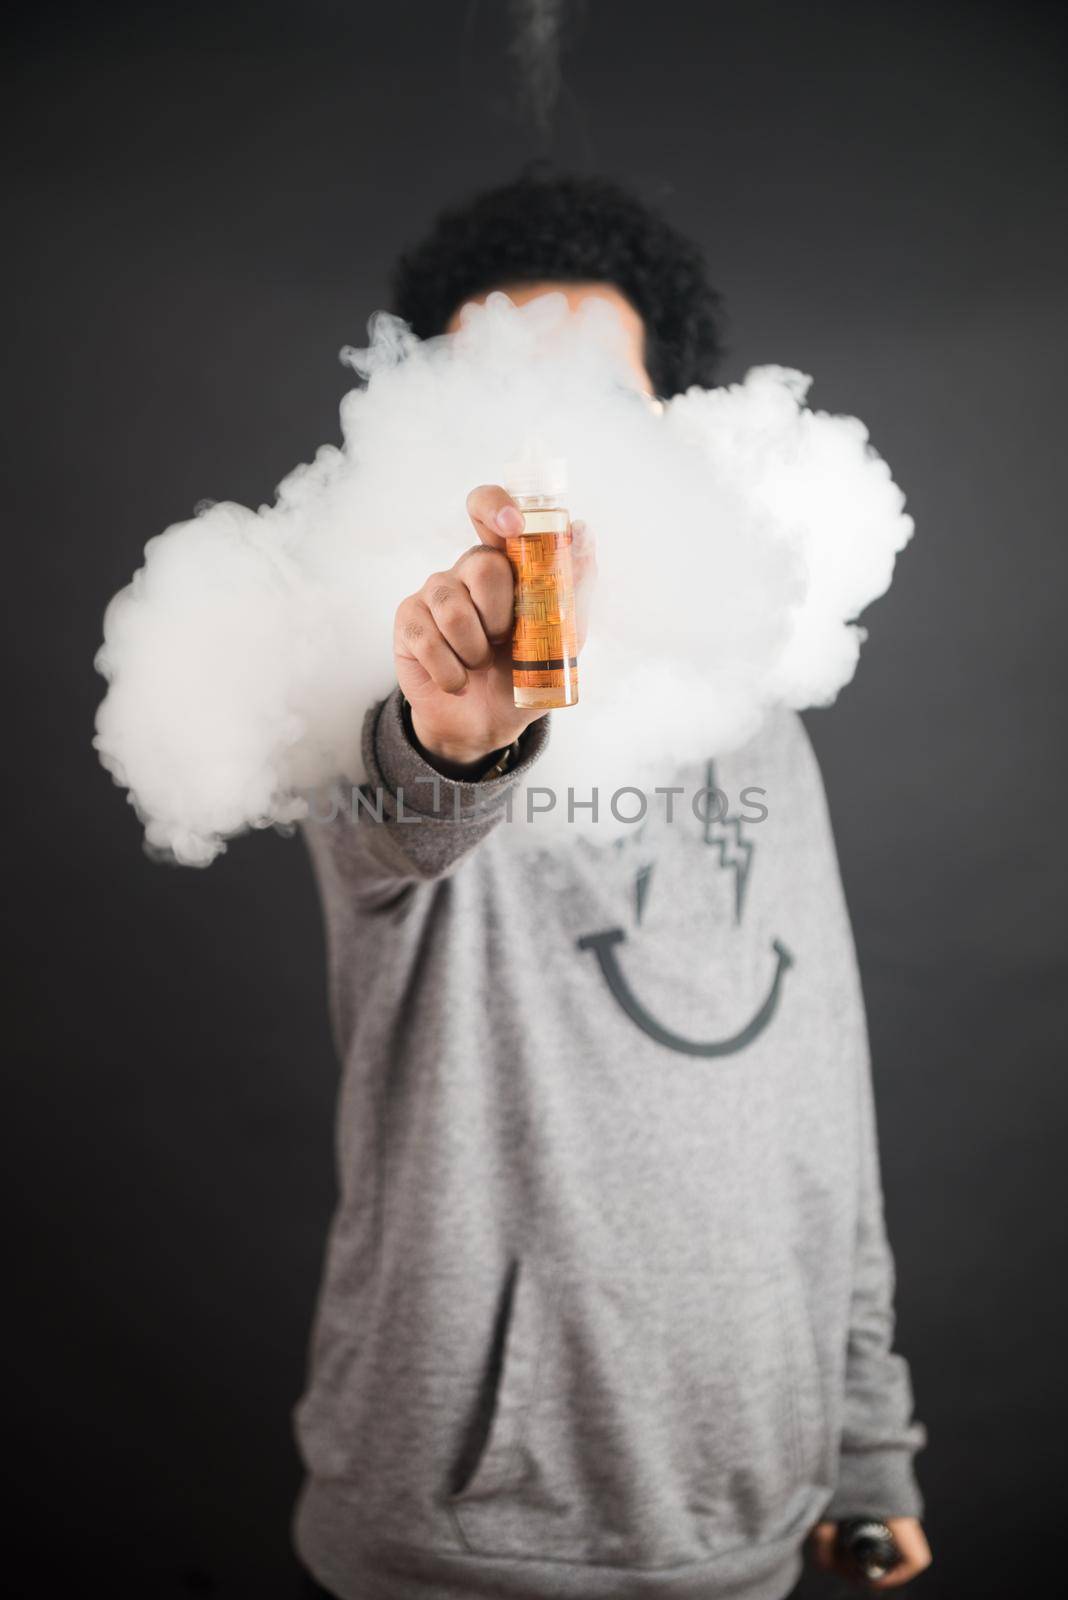 Vape concept. Smoke clouds and vape liquid bottles on dark background. Useful as background or vape advertisement or vape background.